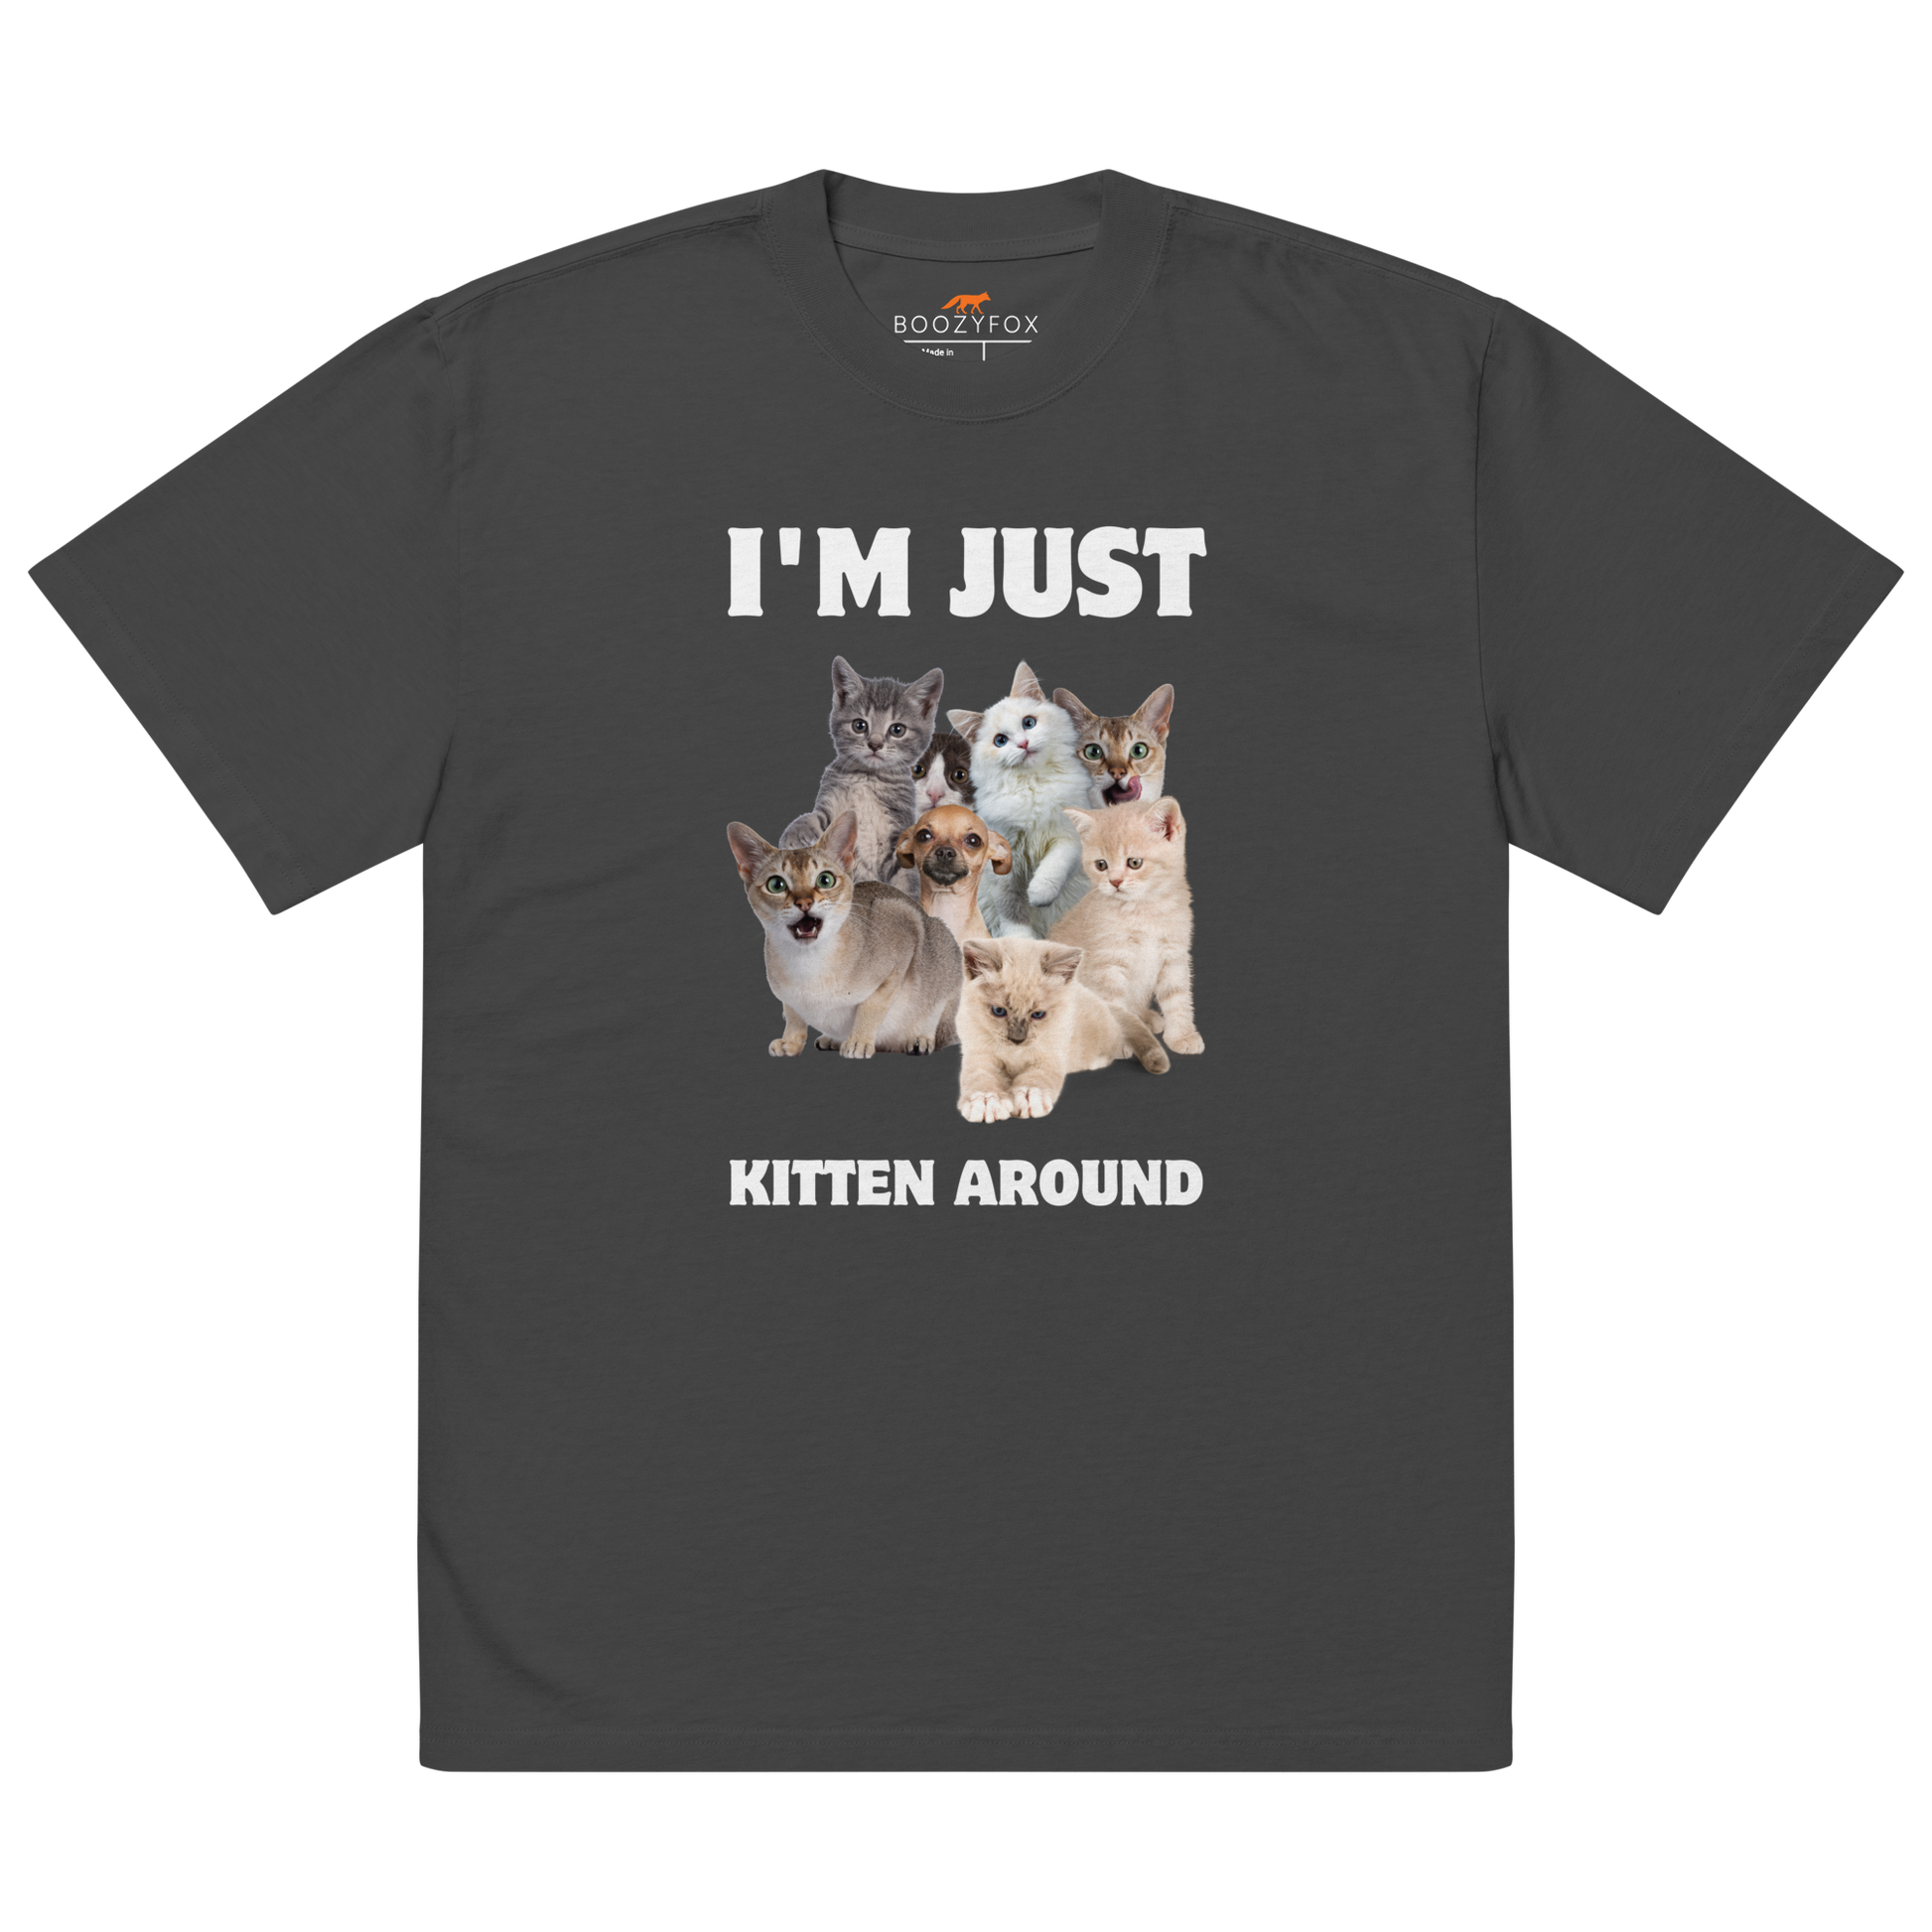 Faded Black Cat Oversized T-Shirt featuring an I'm Just Kitten Around graphic on the chest - Funny Graphic Cat Oversized Tees - Boozy Fox